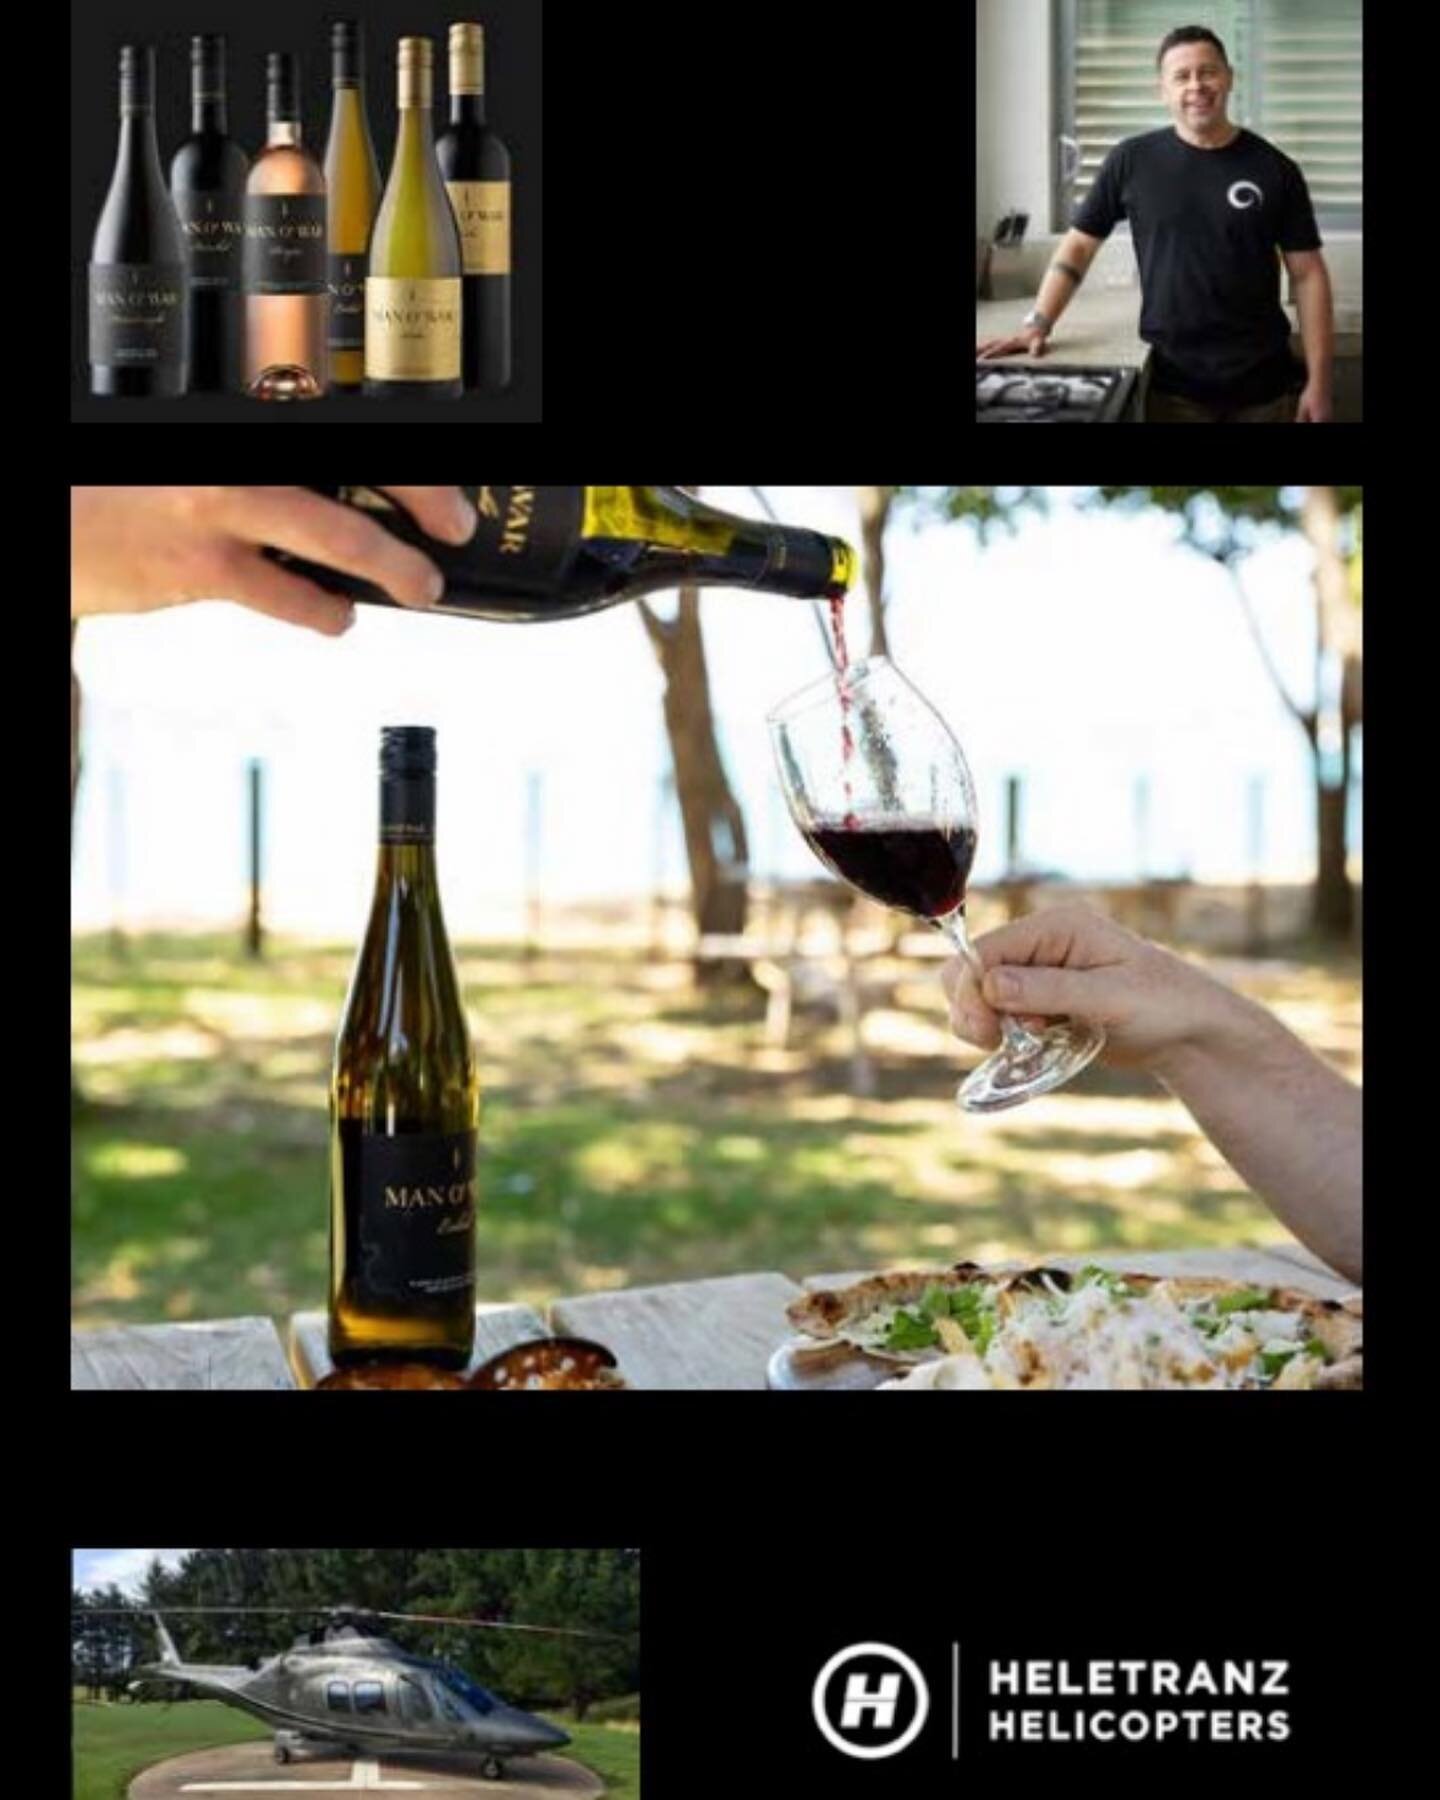 Stocked with the results on this one last week, we&rsquo;ve put together a package with @manowarwine and @heletranz to raise funds for @westpacrescueauckland - for us and many others in our wider community, this service it&rsquo;s essential and we ca